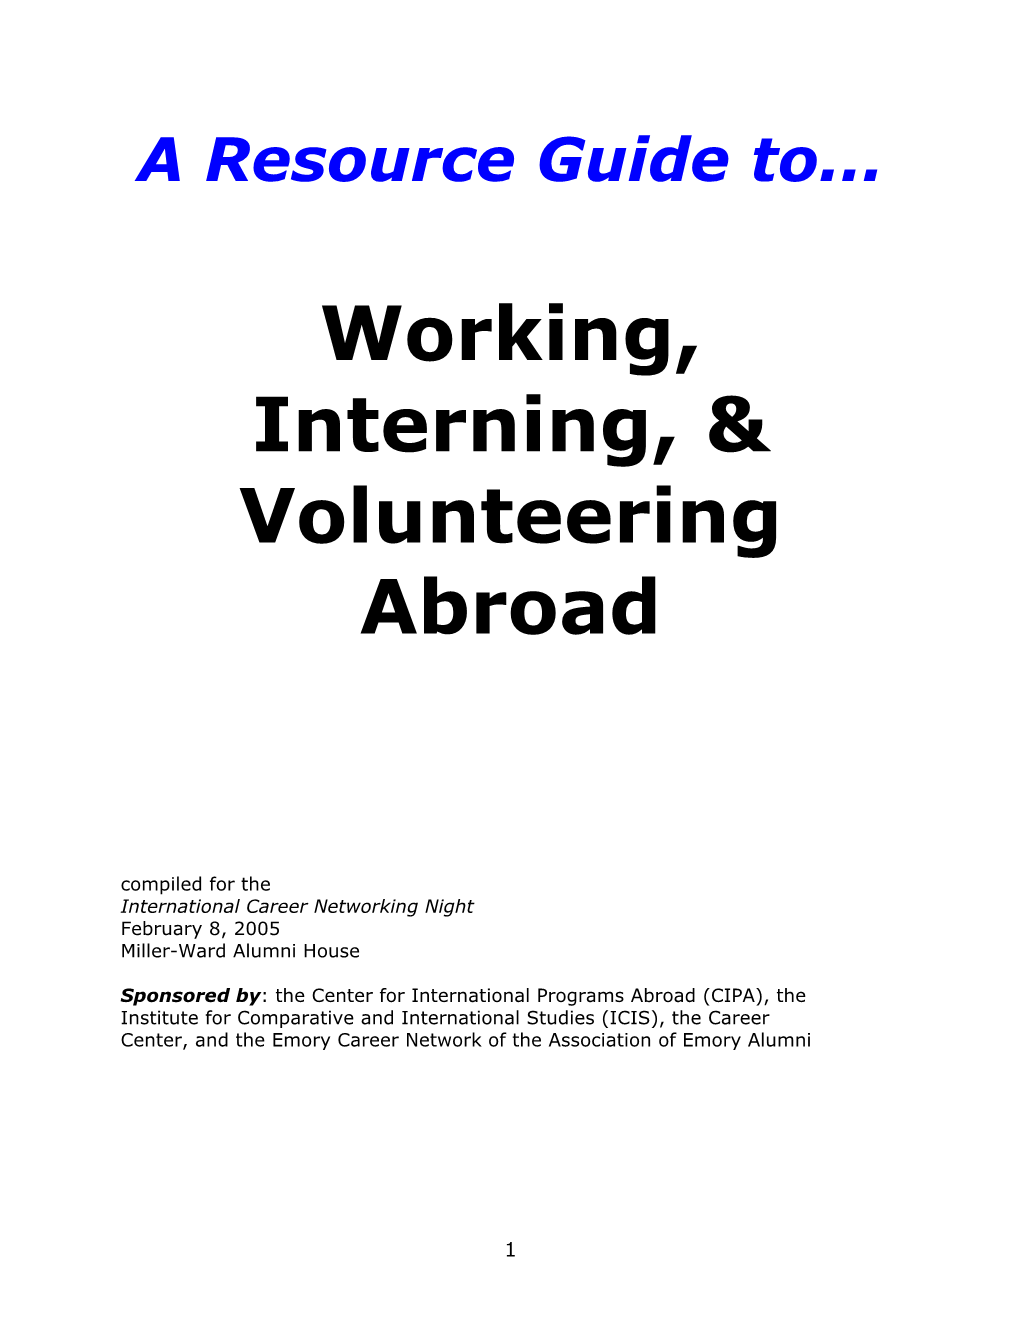 Directories of Work Abroad Programs